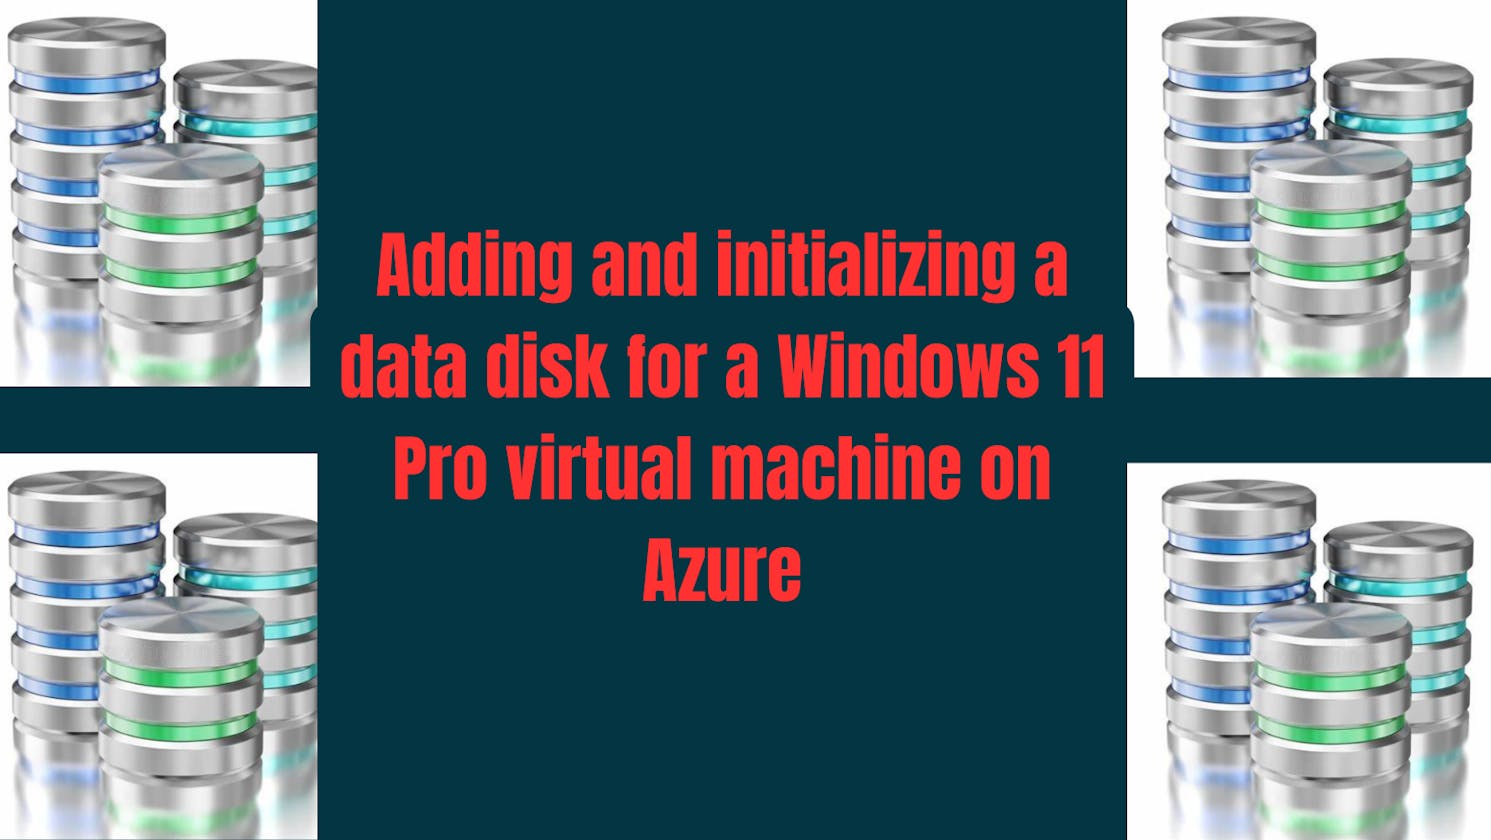 Adding and initializing a data disk for a Windows 11 Pro virtual machine on Azure